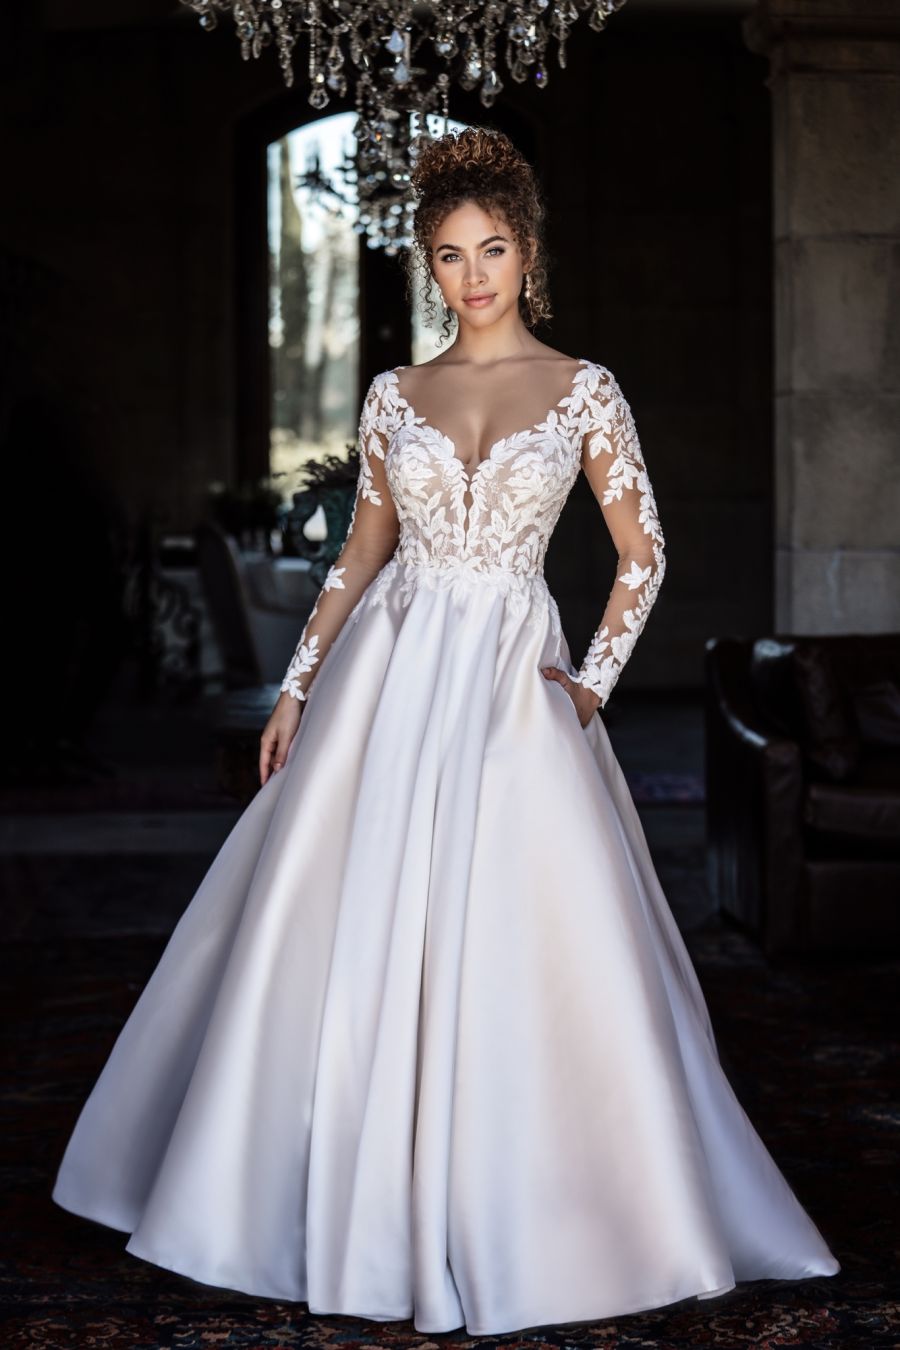 Long Sleeve Ball Gown Wedding Dress With Lace Bodice And Mikado Skirt